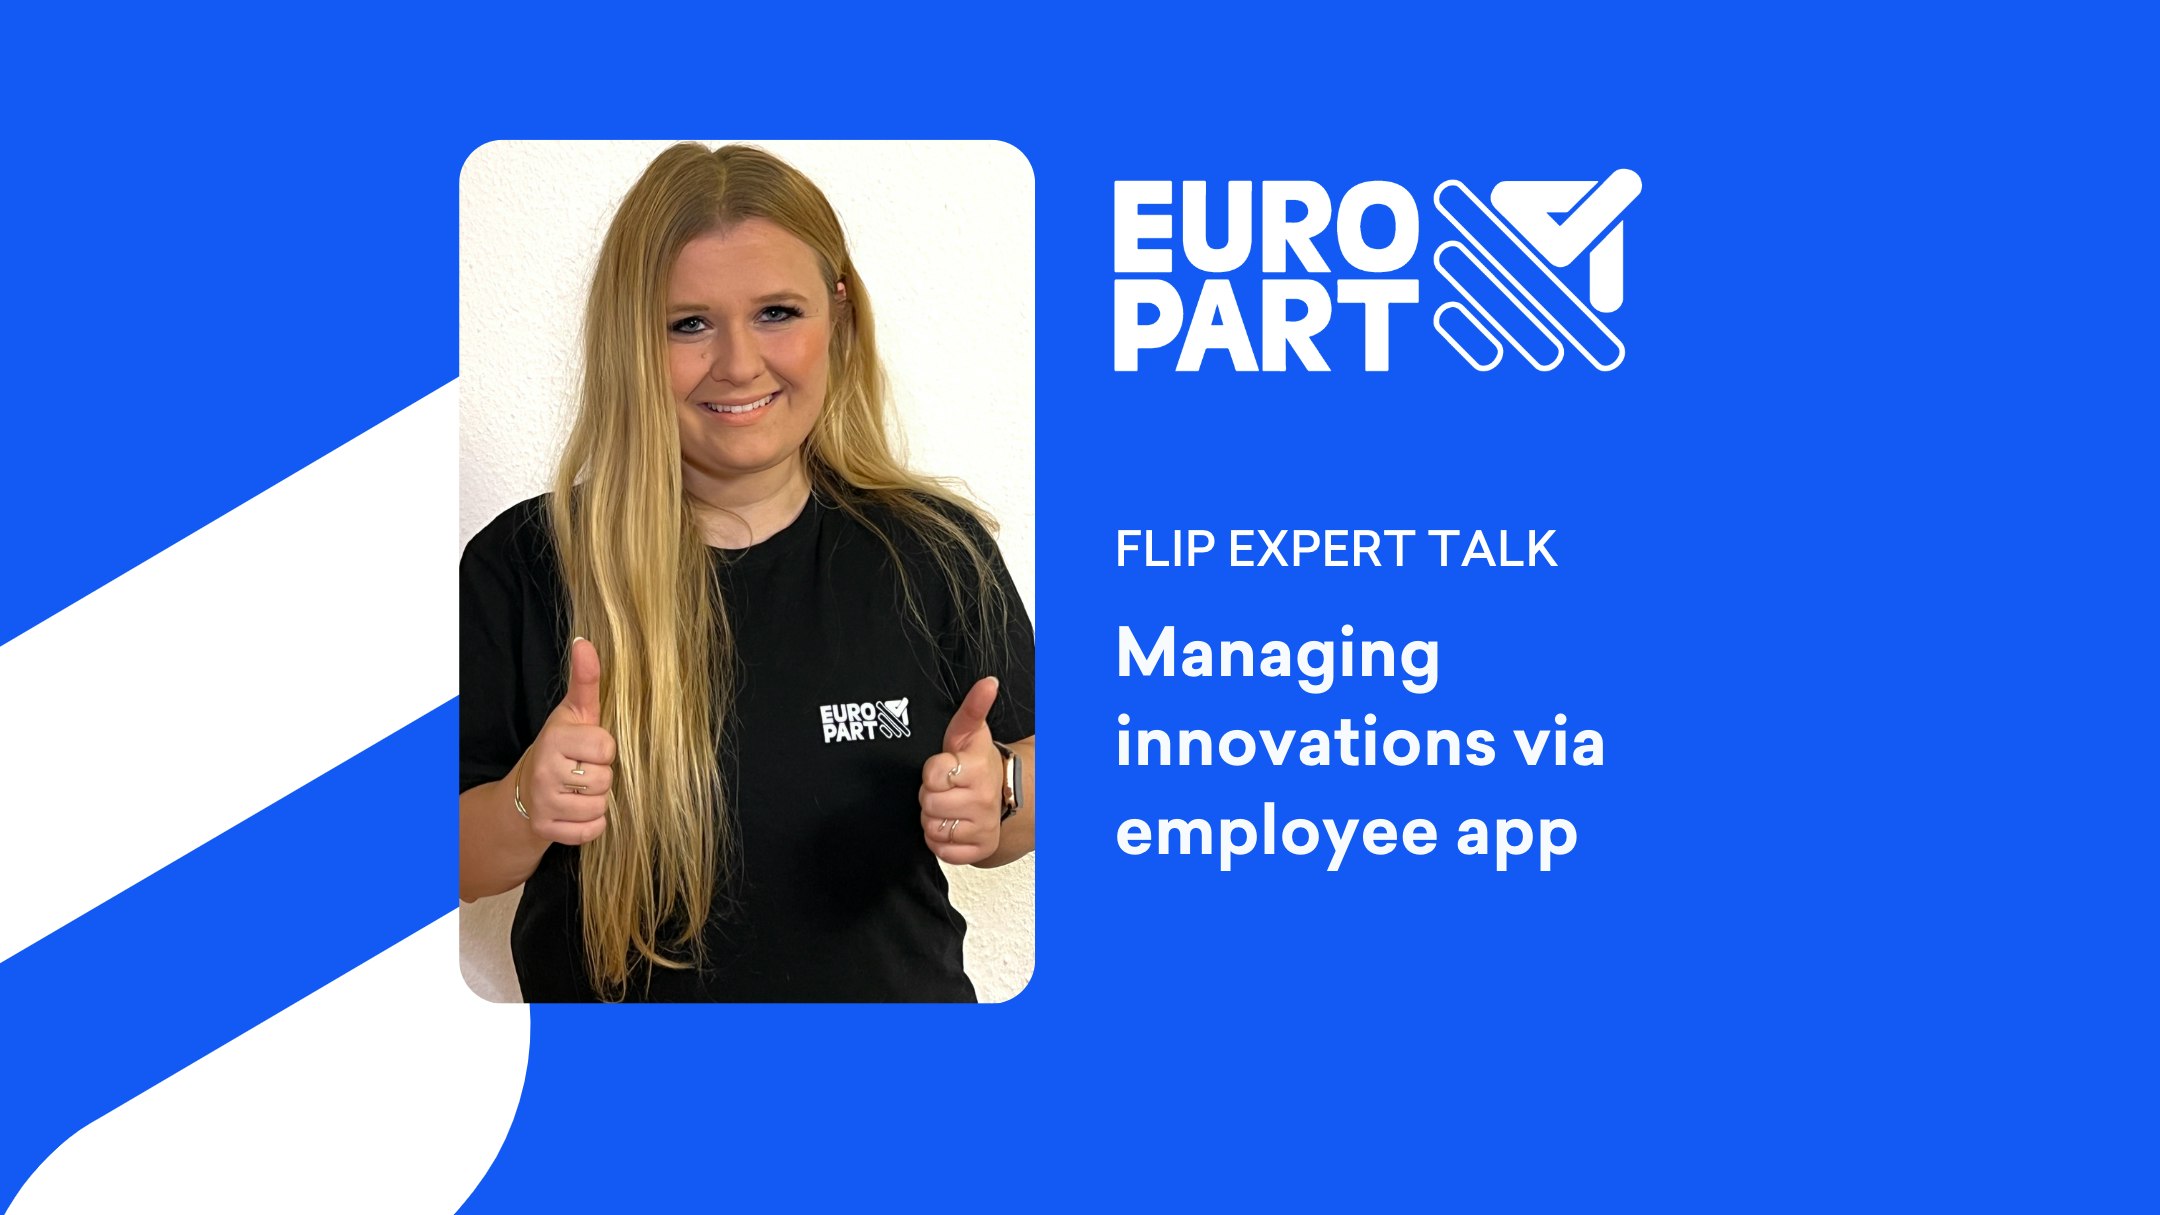 Kira Kebekus from Europart gives both thumbs up. Next to it is the title of the expert talk. 